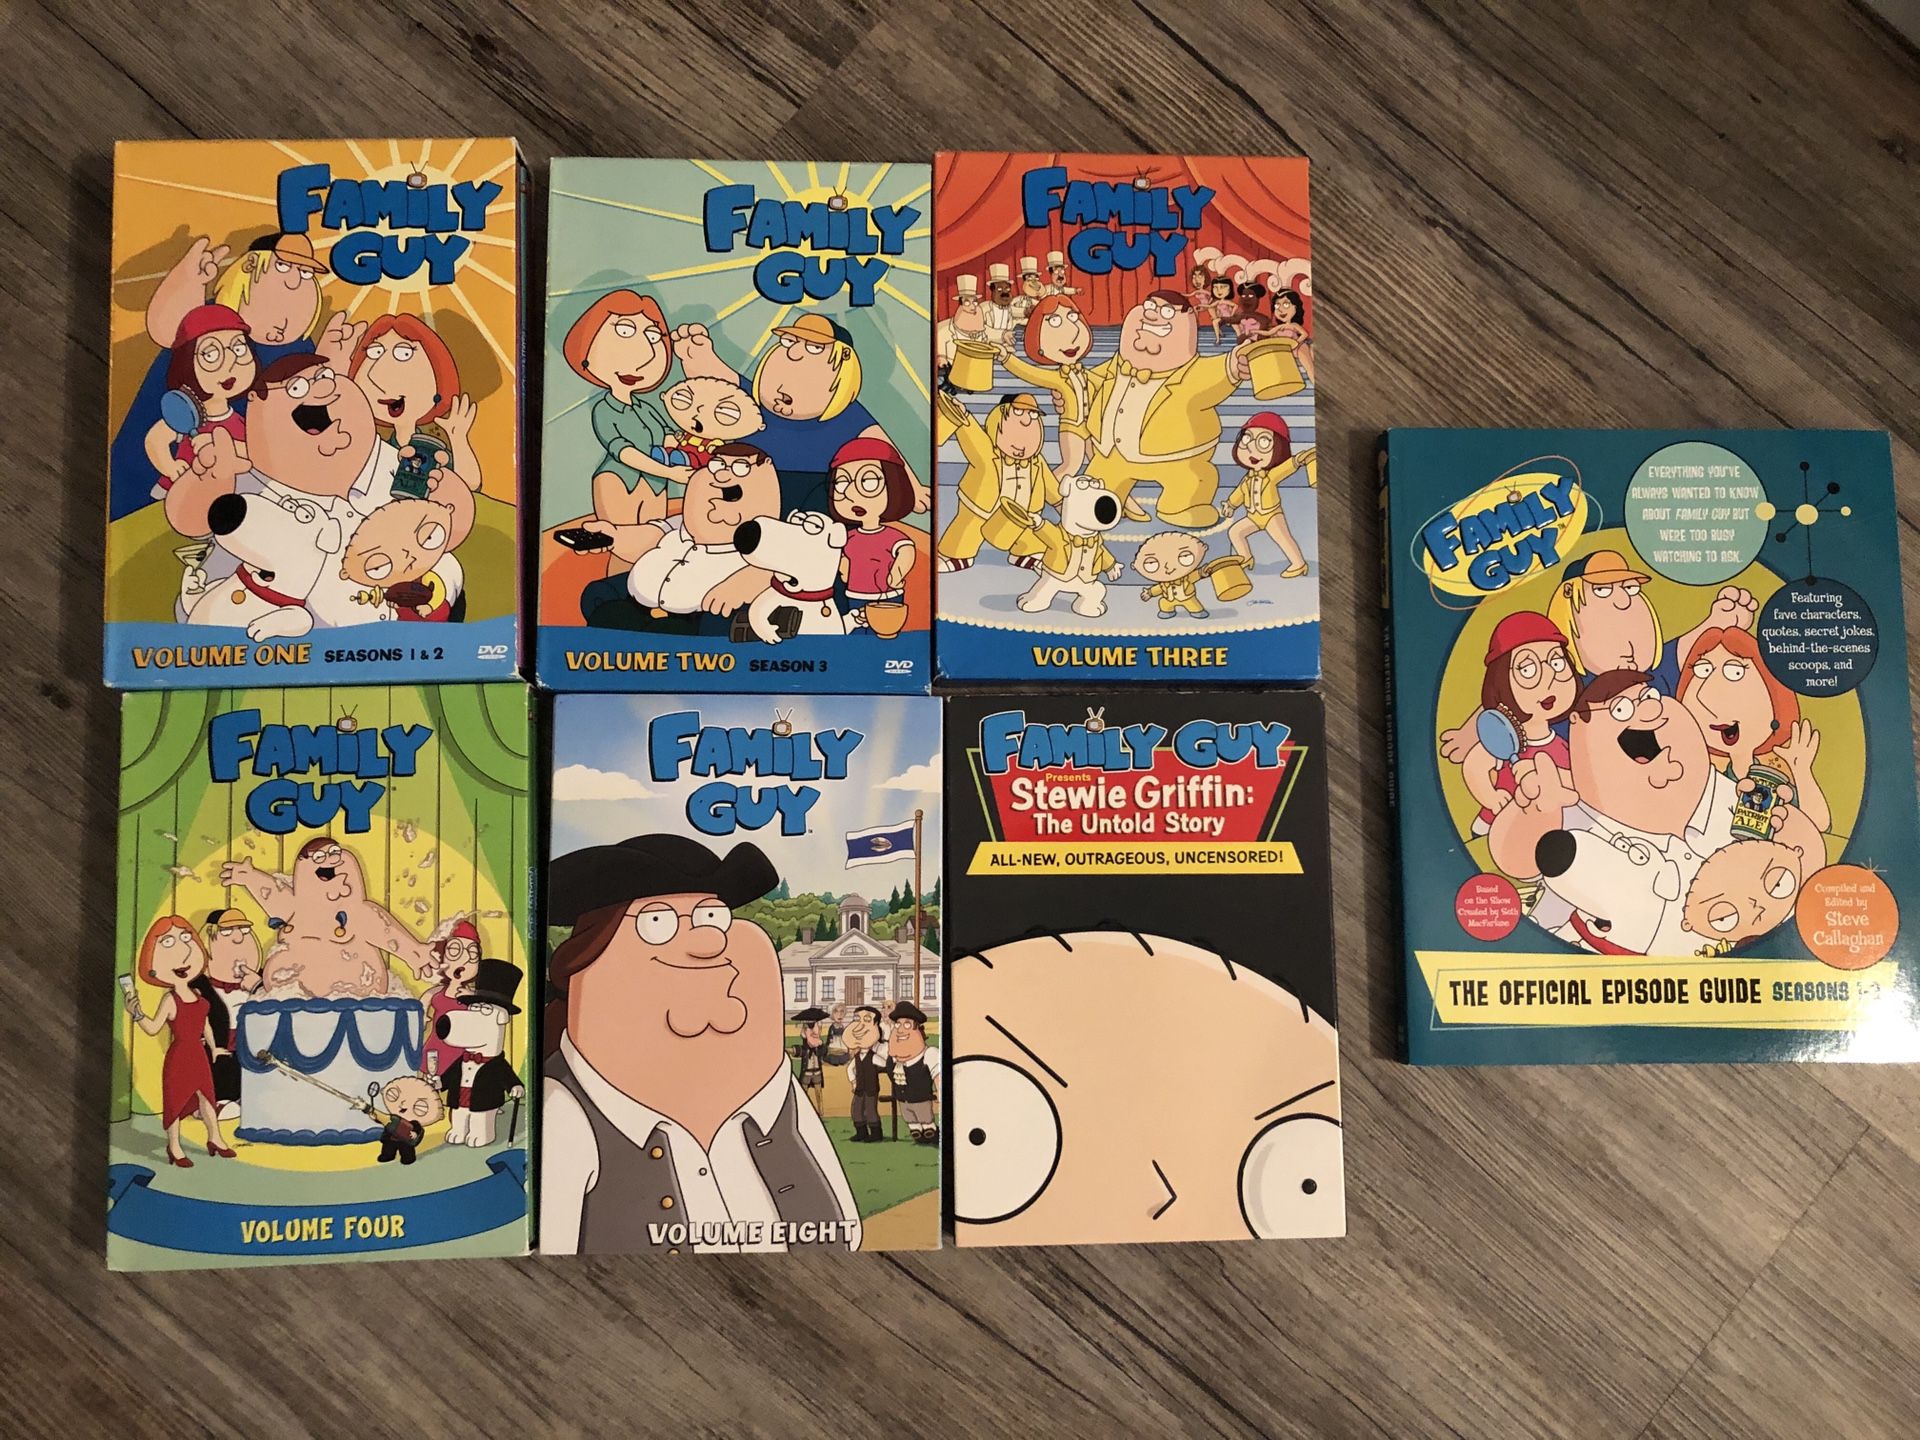 Family Guy 6 seasons of DVDs plus book. Pick up in Northeast Palm Bay by Lockmar Elementary